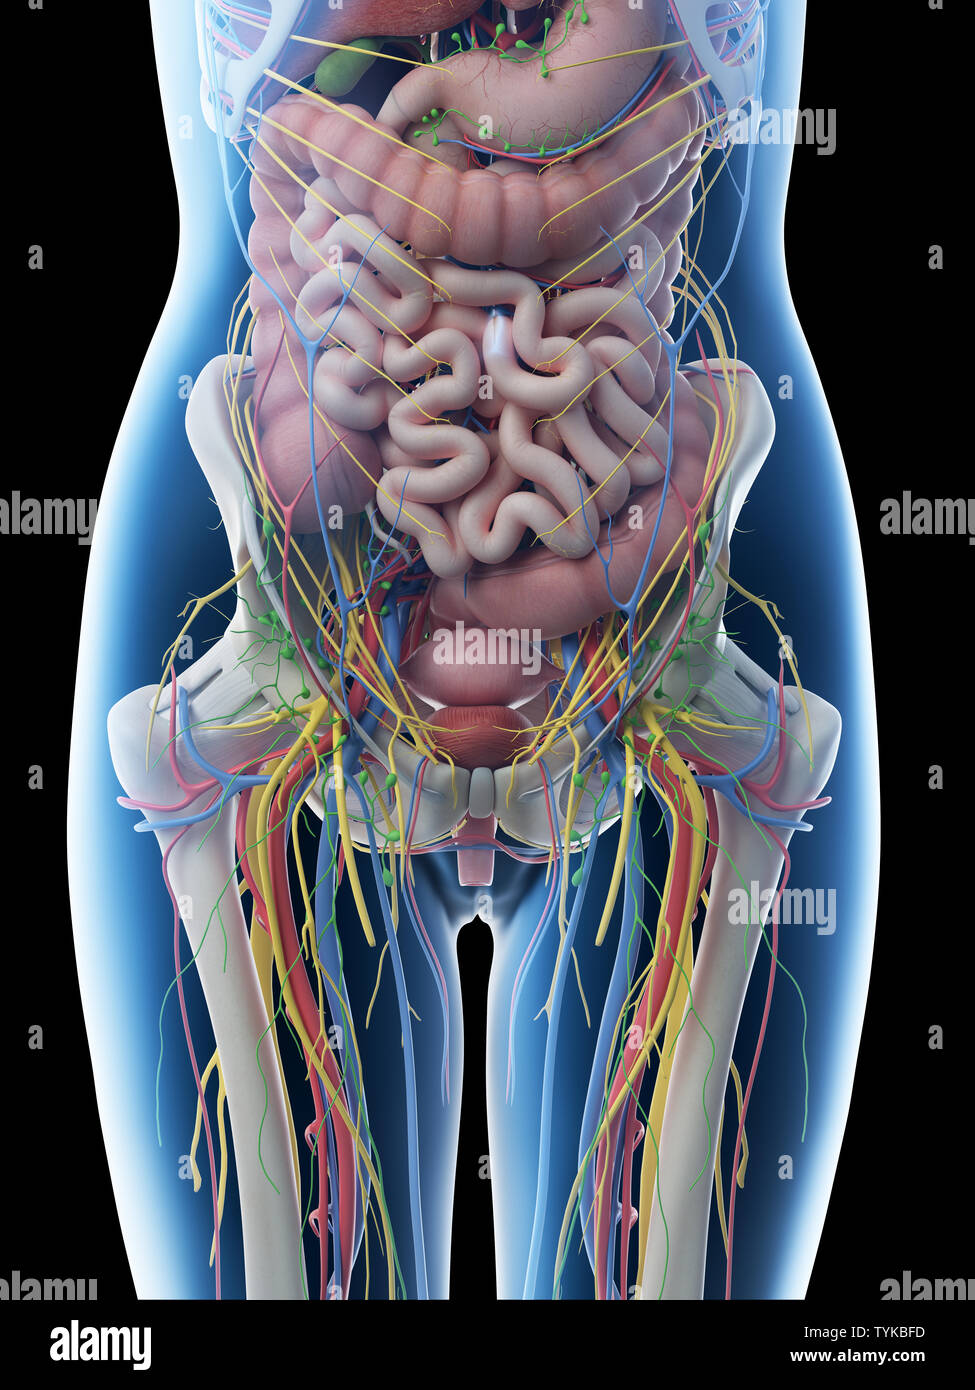 Anatomy and Physiology/Human Biology Online Course - Stens 